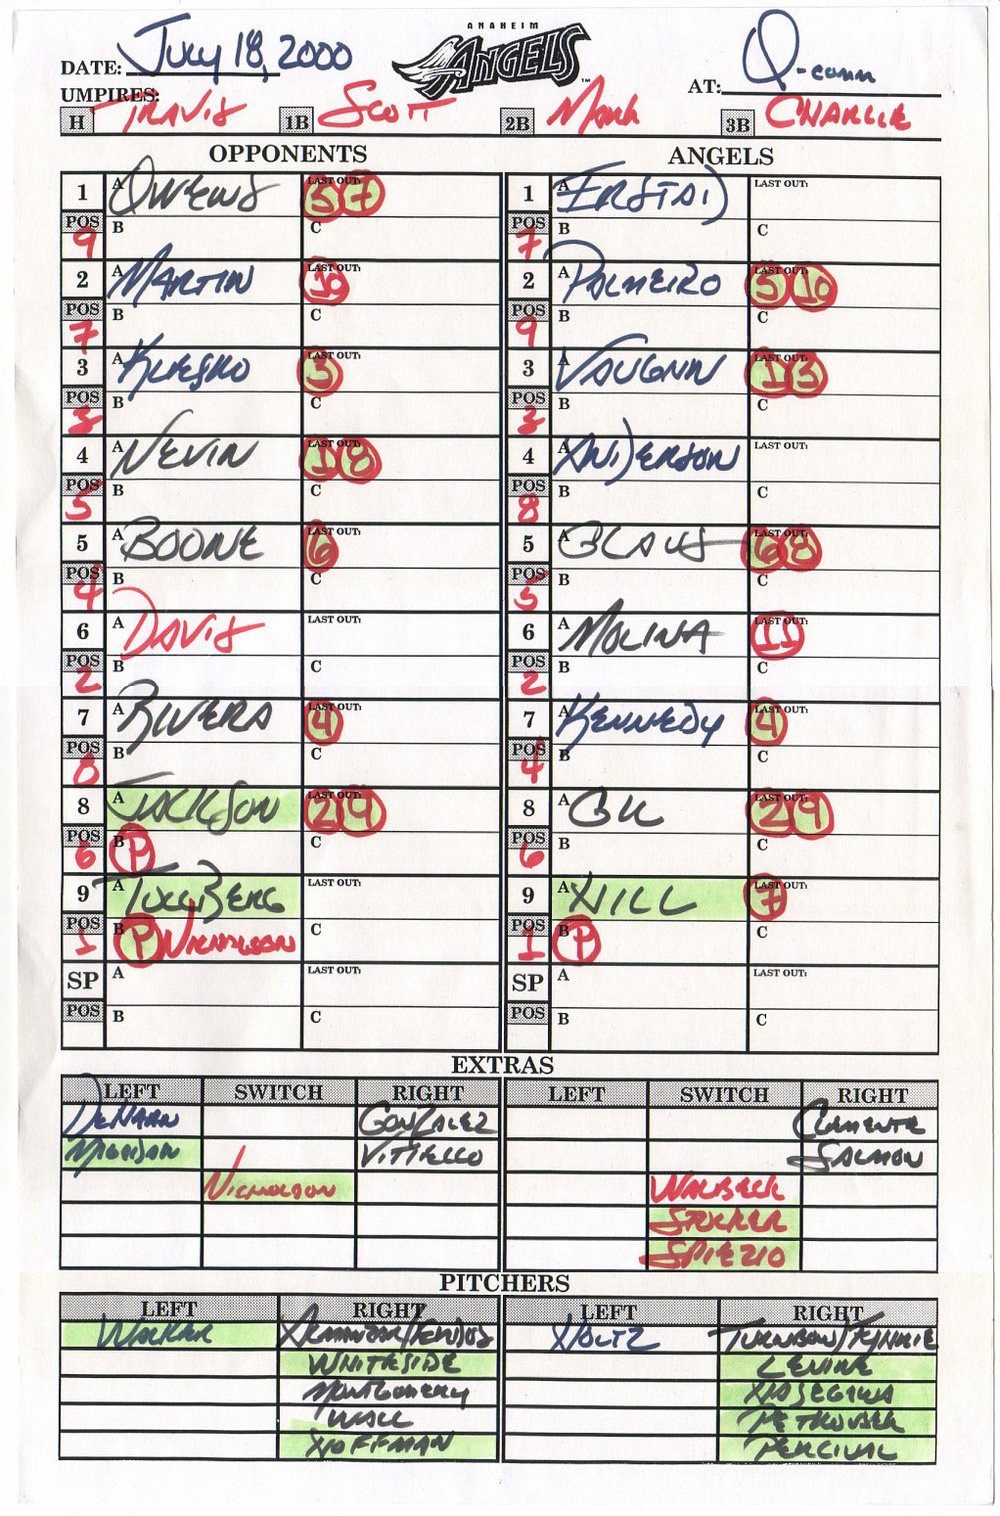 Zack Hample's Lineup Cards — Zack Hample In Dugout Lineup Card Template